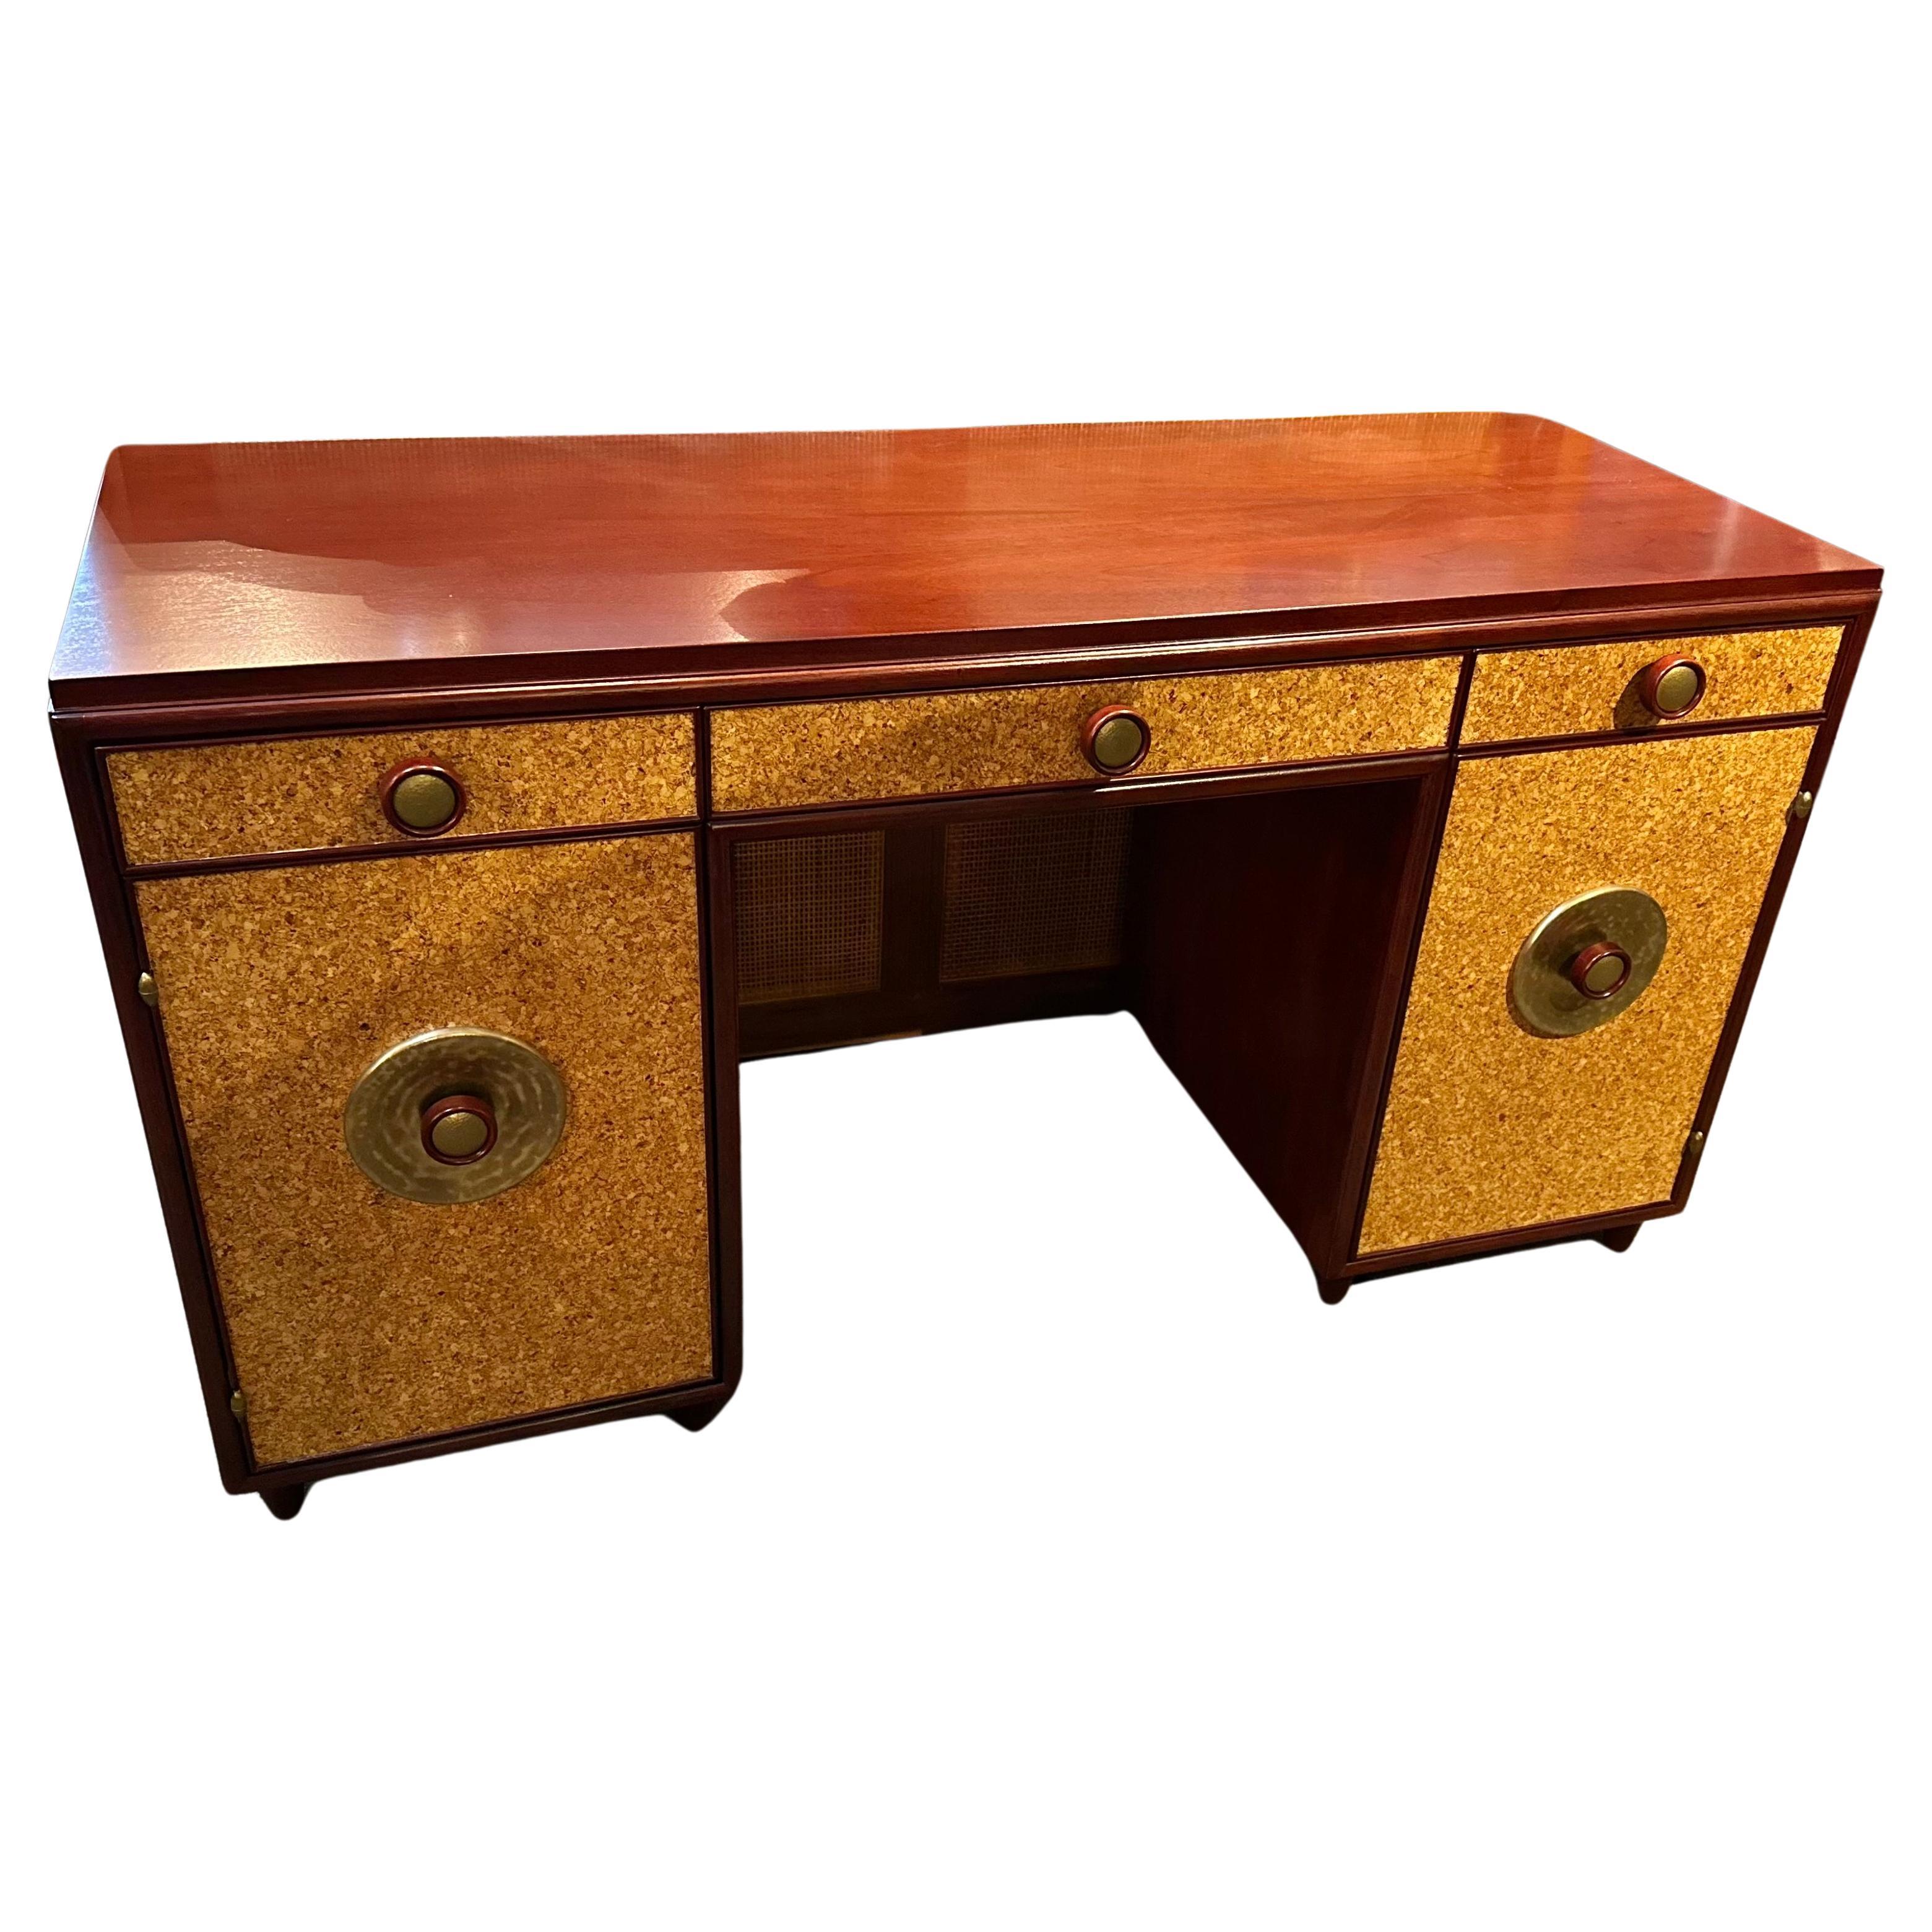 Seldom seen Mahogany and Cork Desk by Paul Frankl for Johnson For Sale